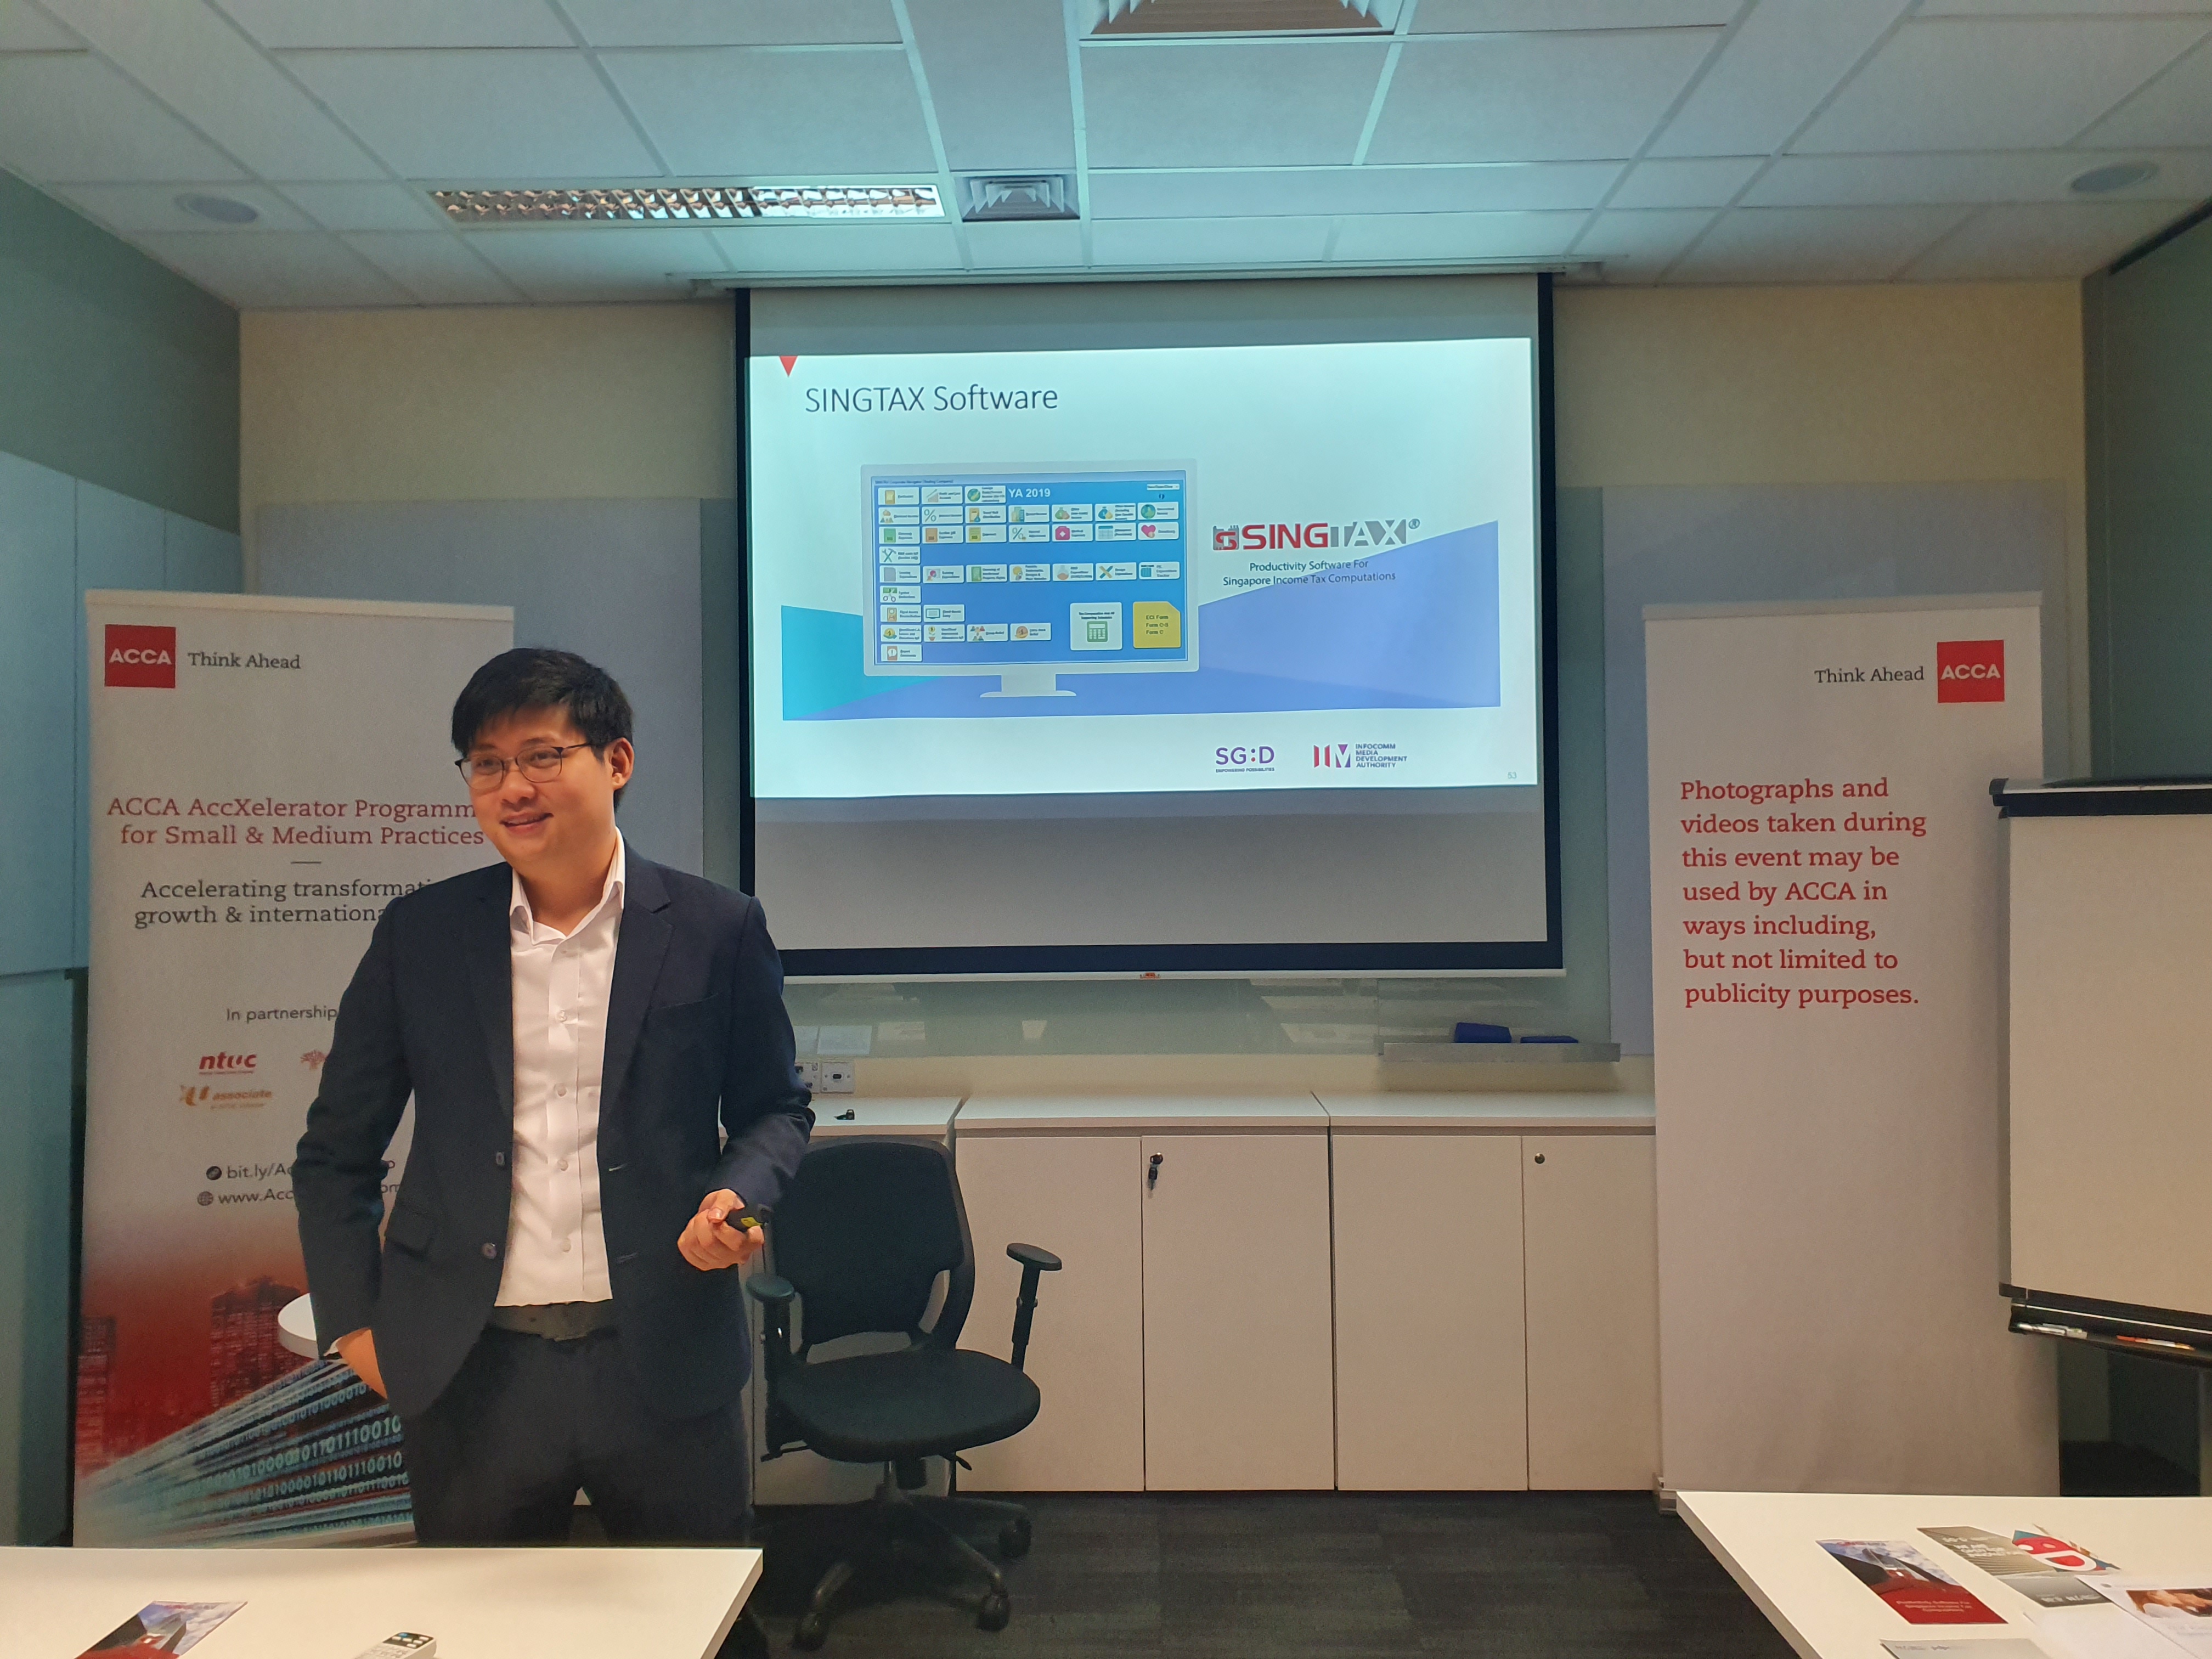 Jeremy Tan presenting SINGTAX at ACCA AccXelerator Programme for Small & Medium Practices (SMPs)